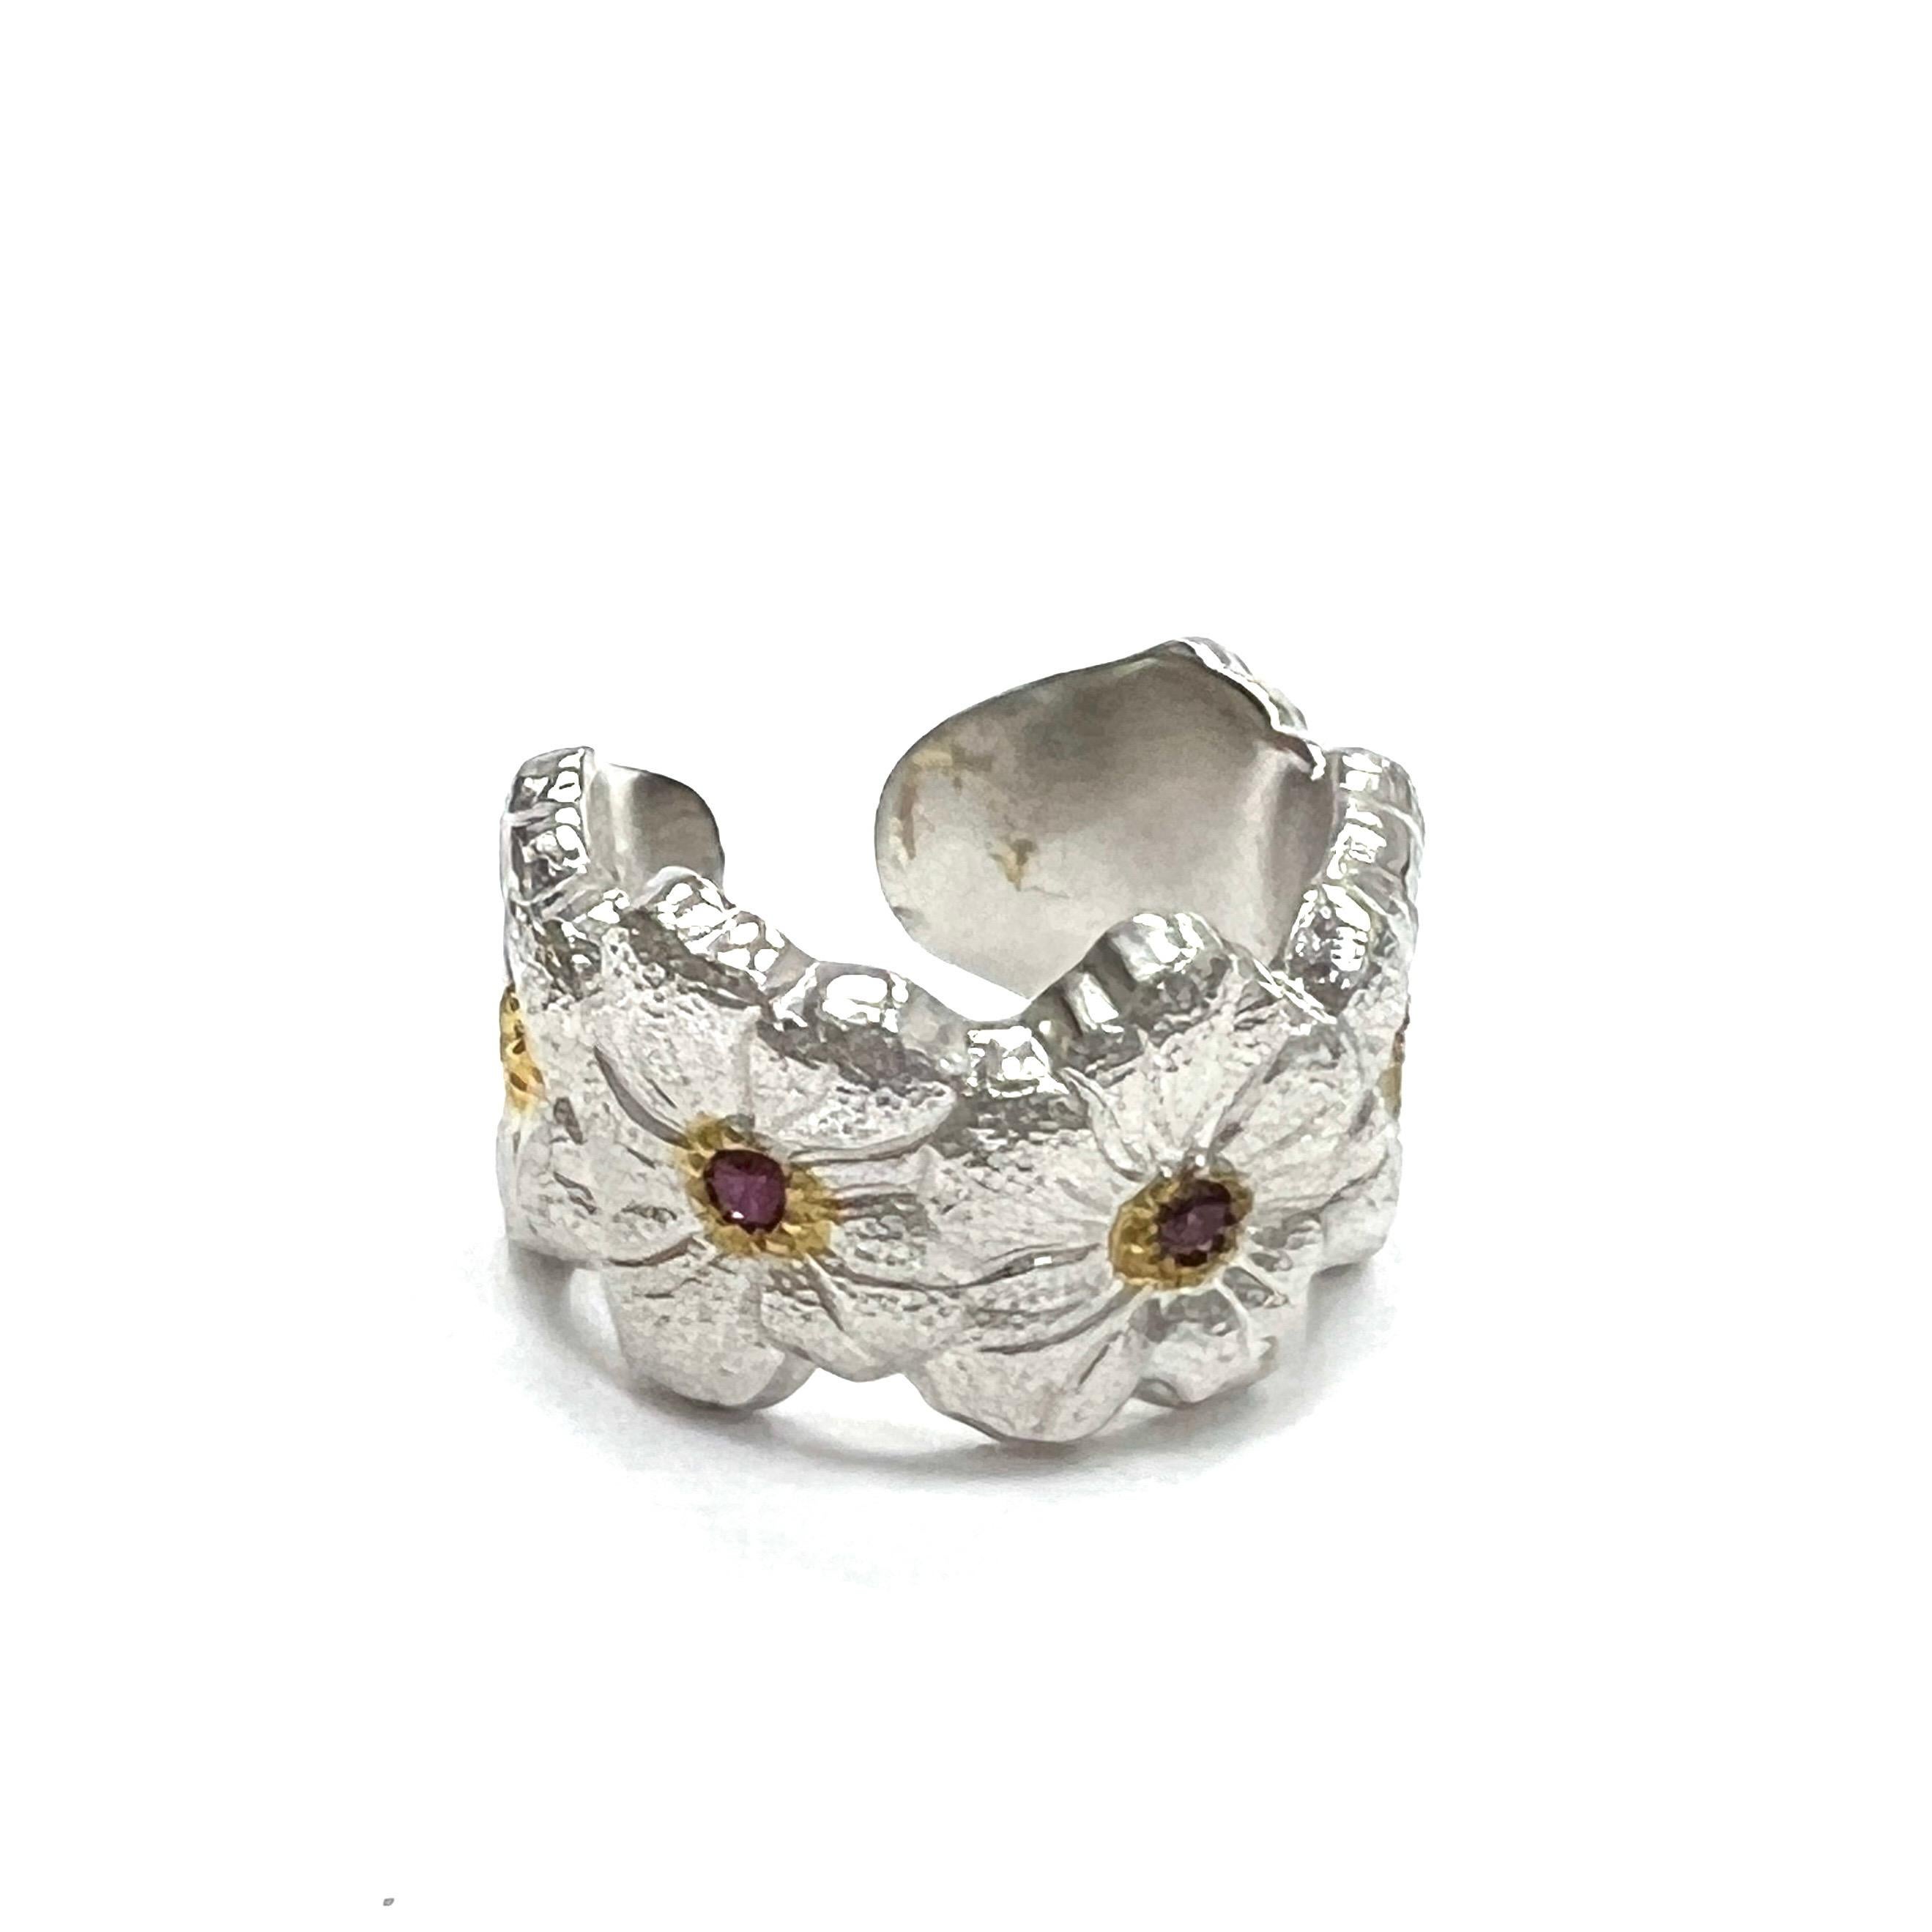 Buccellati Blossoms Ruby Sterling Silver Ring, Italian

Blossoms flowers made of sterling silver with round-cut bezel-set rubies of approximately 0.10 carat; marked Buccellati, Italy, 925, Sterling

Size: 6.5 US; width 1.2 cm
Total weight: 11.6 grams